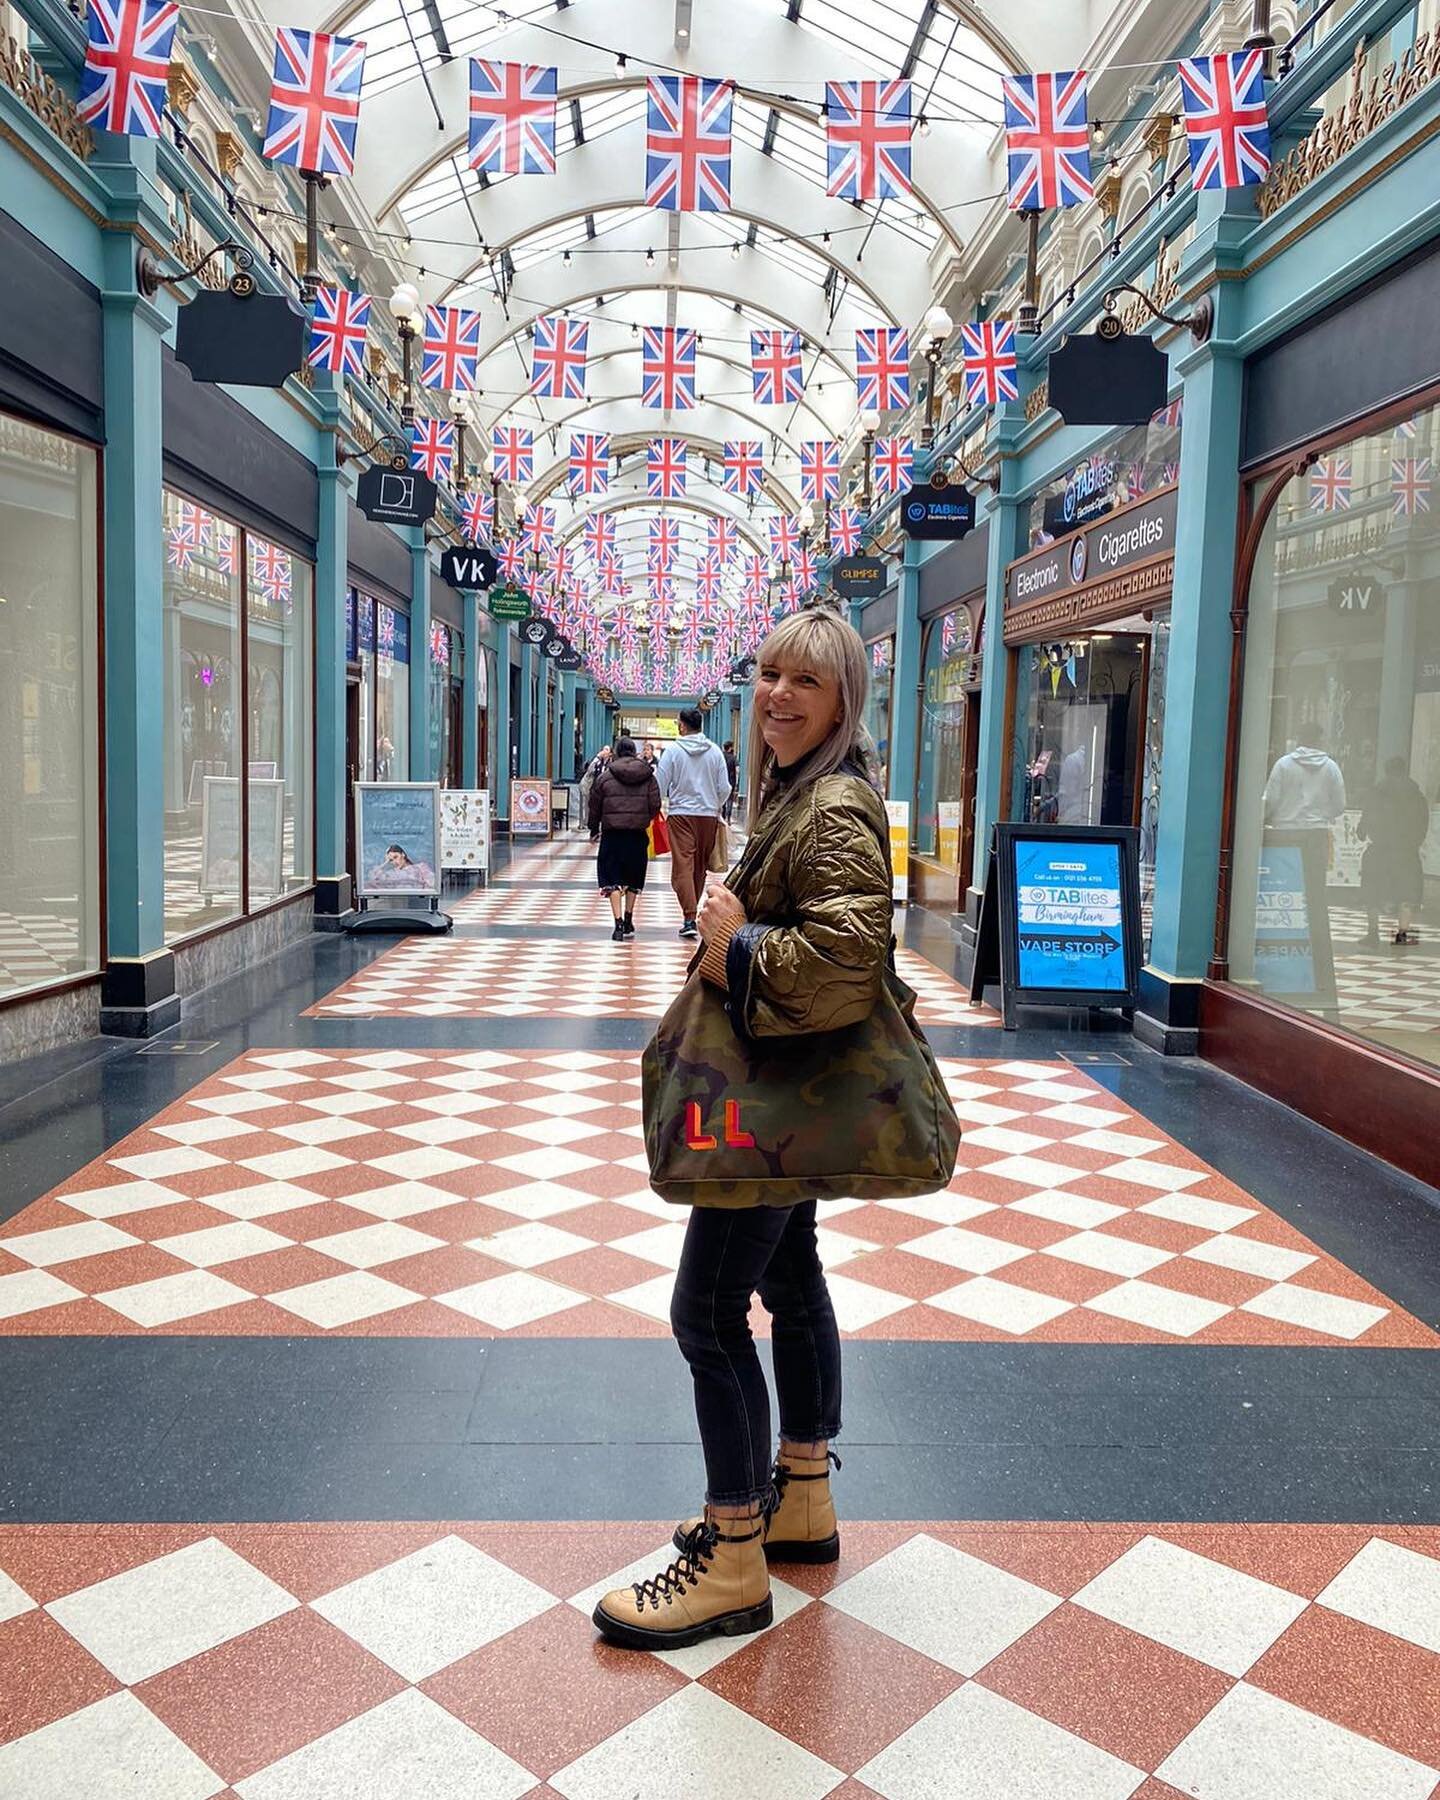 The gorgeous and stacked full of awesome independents &lsquo;Great Western Arcade&rsquo; @gwabirmingham and the exceptional photography skills of @emilyandkaty 📸 Happy long week end everyone 😁😁 #supportsmallbusiness #shopindependent #shopsmallbusi